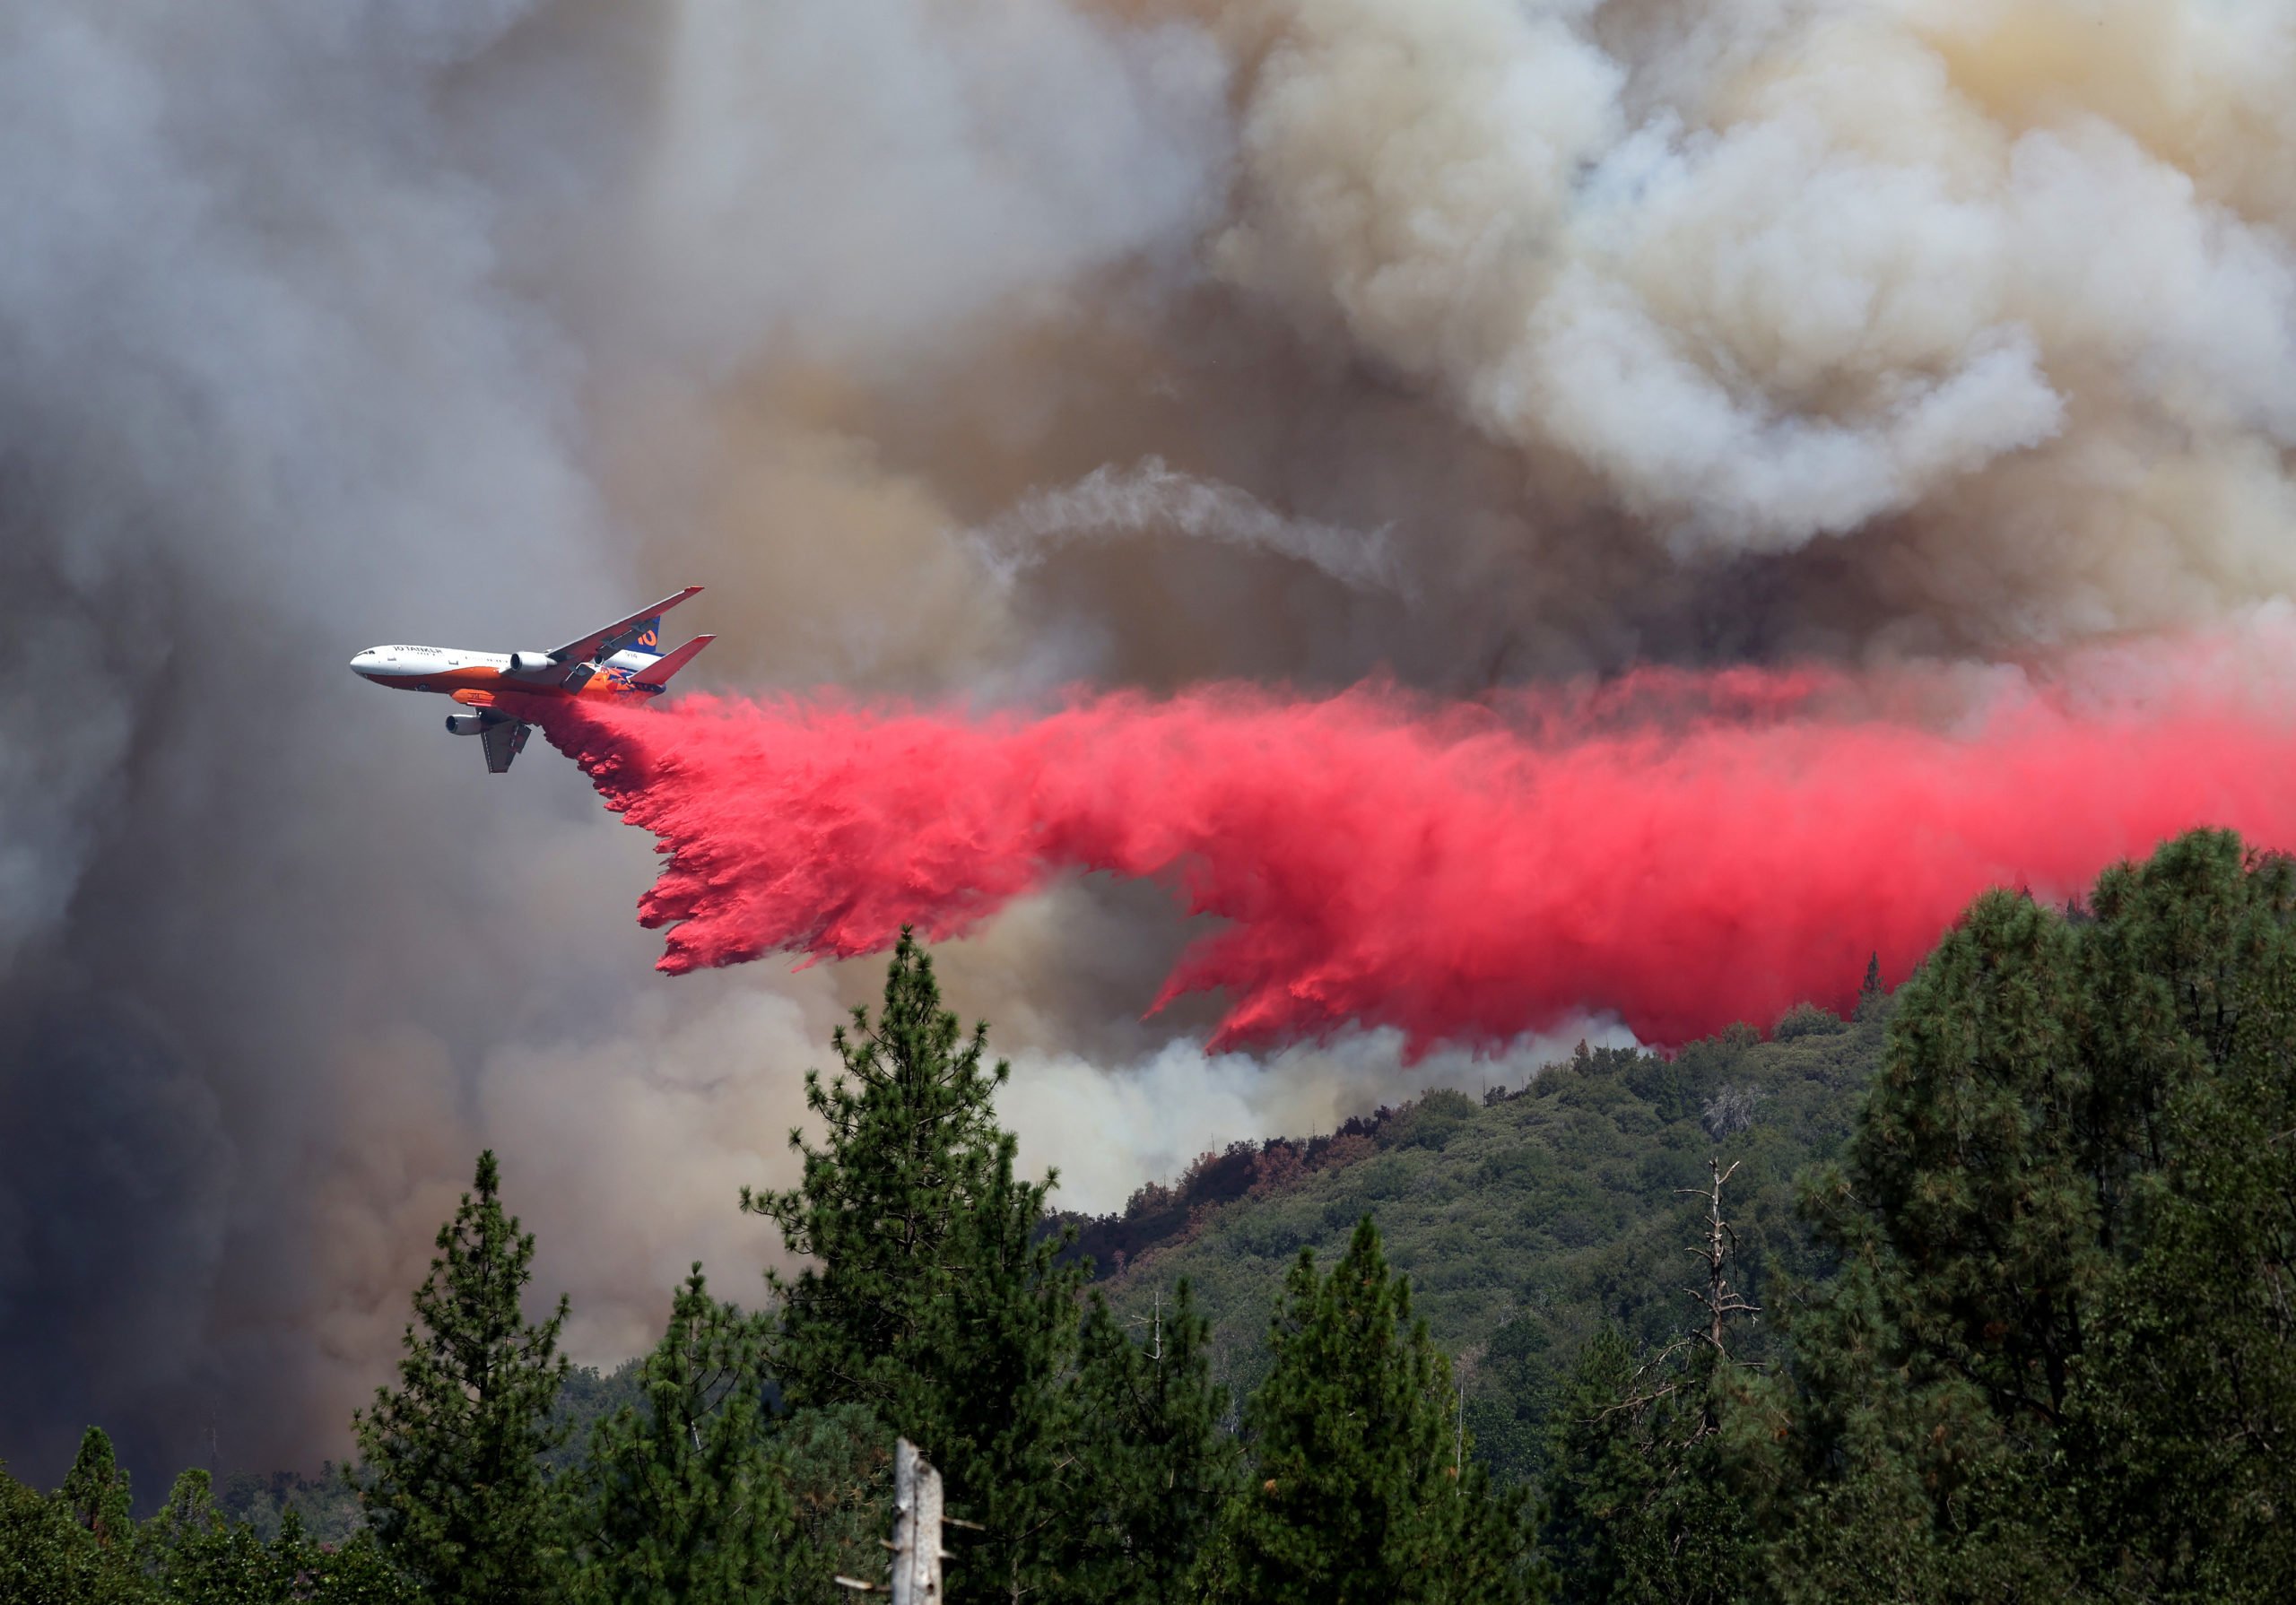 JERSEYDALE, CALIFORNIA - JULY 24: A firefighting aircraft drops retardant ahead of the Oak Fire on July 24, 2022 near Jerseydale, California. The fast moving Oak Fire burning outside of Yosemite National Park has forced evacuations, charred over 14,000 acres and has destroyed several homes since starting on Friday afternoon. The fire is zero percent contained. (Photo by Justin Sullivan/Getty Images)